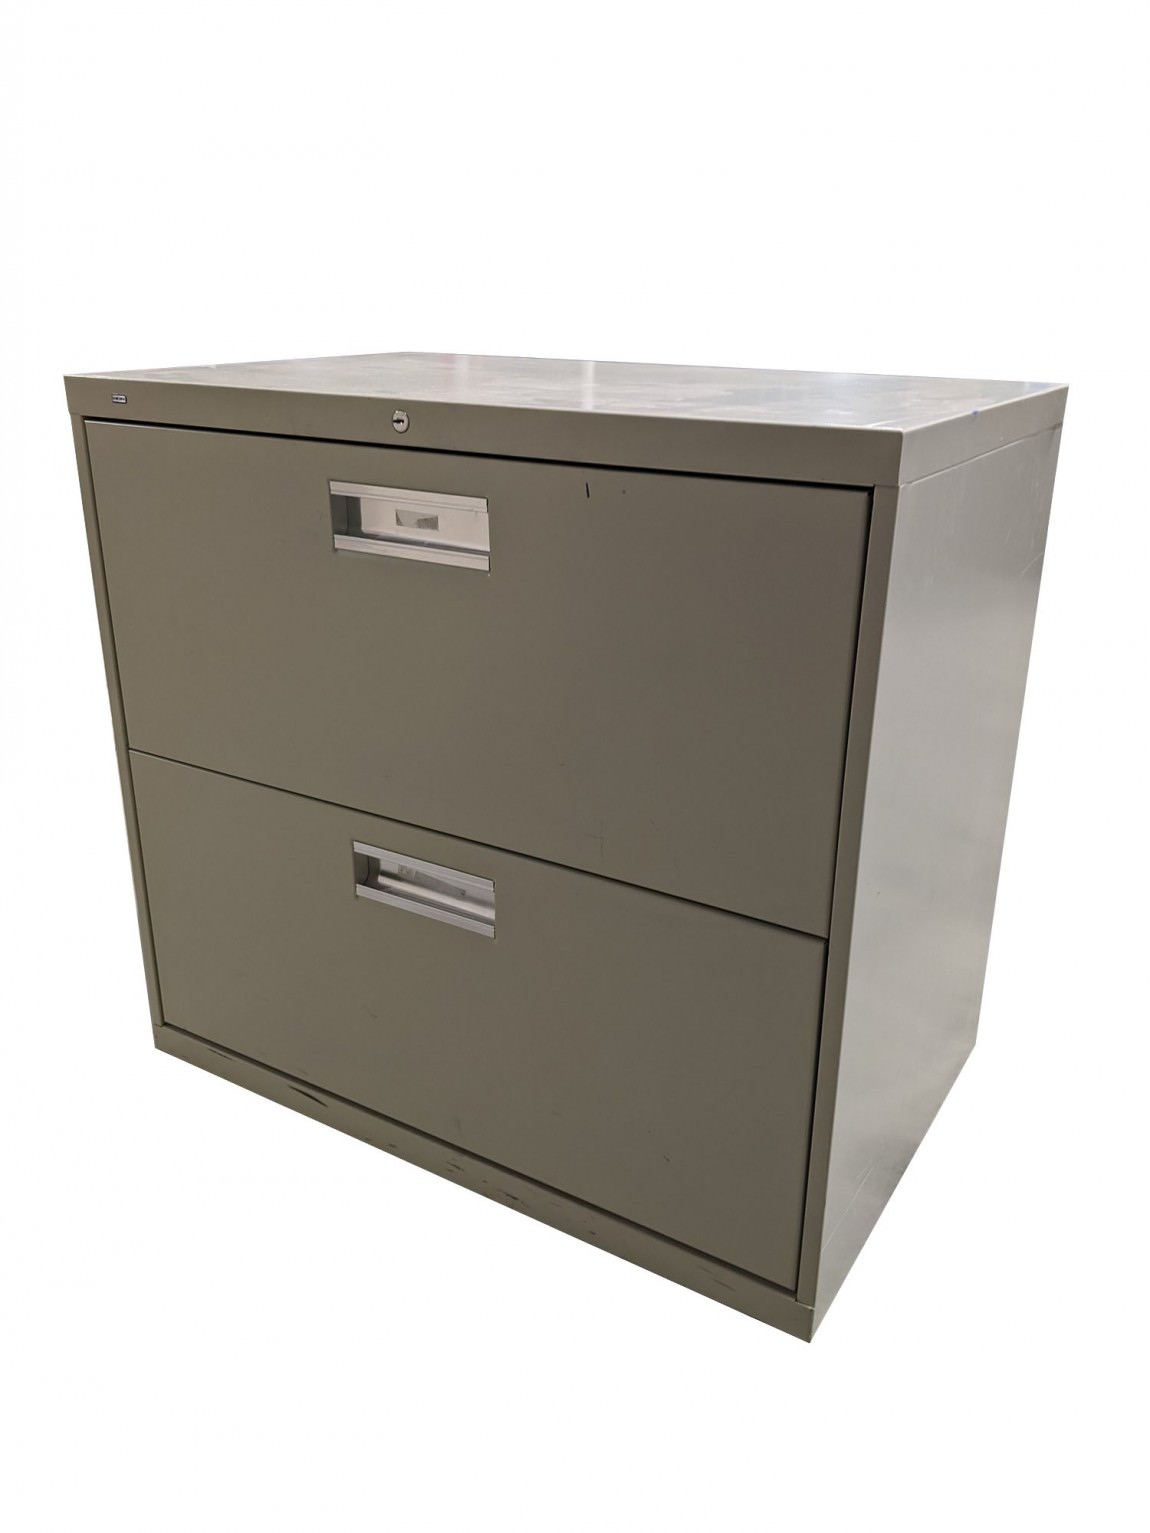 Putty Hon 2 Drawer Lateral Filing Cabinet – 30 Inch Wide by Hon